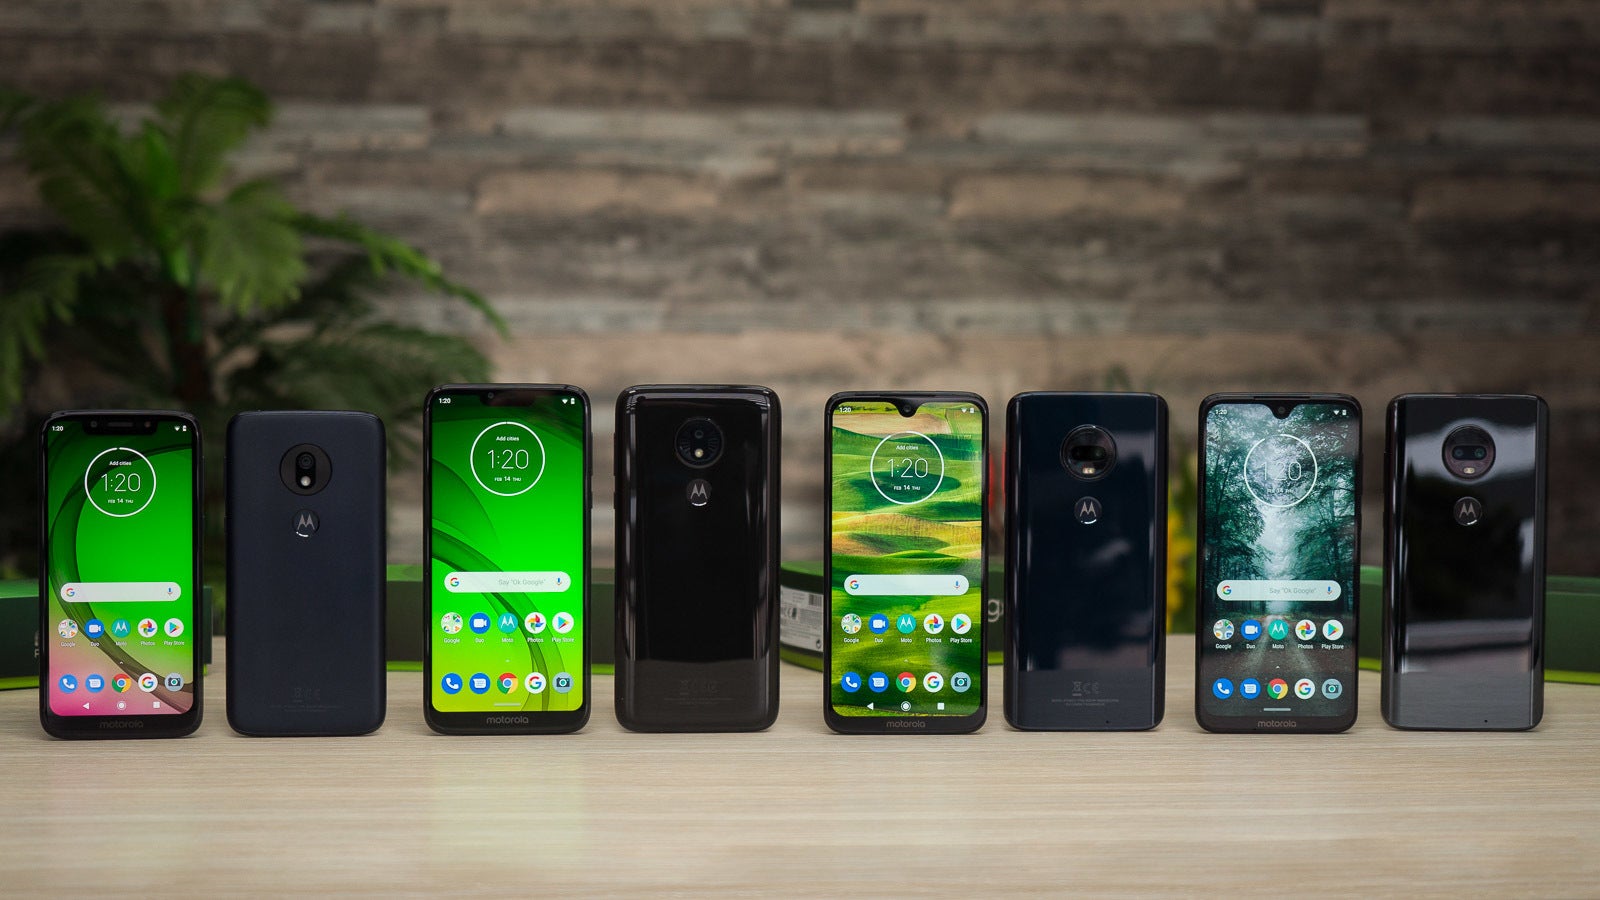 The Moto G7 series pictured front and back — G7 Play, G7 Power, G7 Plus, G7 - Moto G evolution: excellent averageness through the years